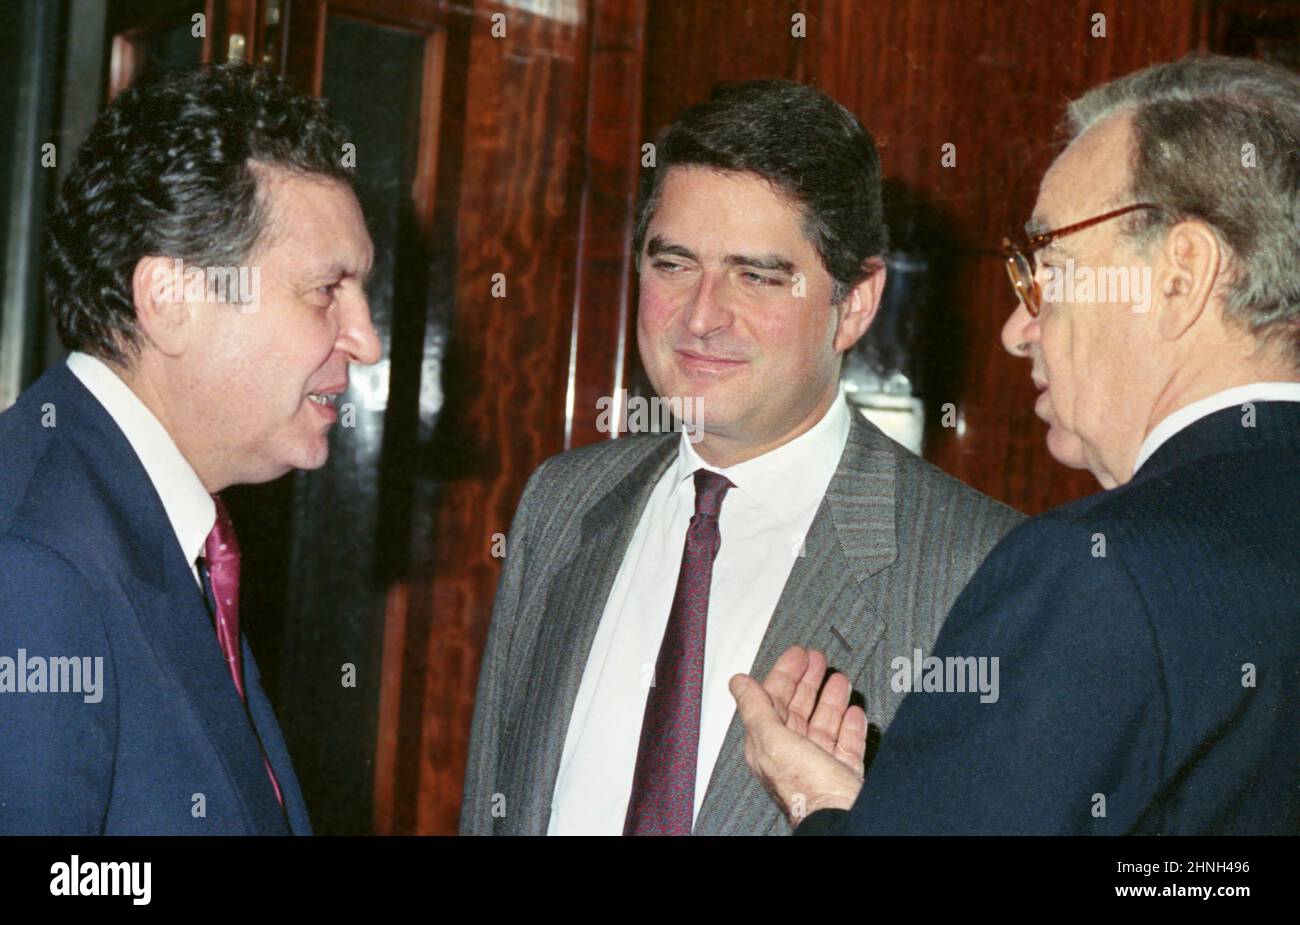 Bucharest, Romania, 1990. Australian- American business magnate Rupert Murdoch (right) with Romanian author & director of the Romanian Television Aurel Dragoș Munteanu (left), soon after the fall of communism. Stock Photo